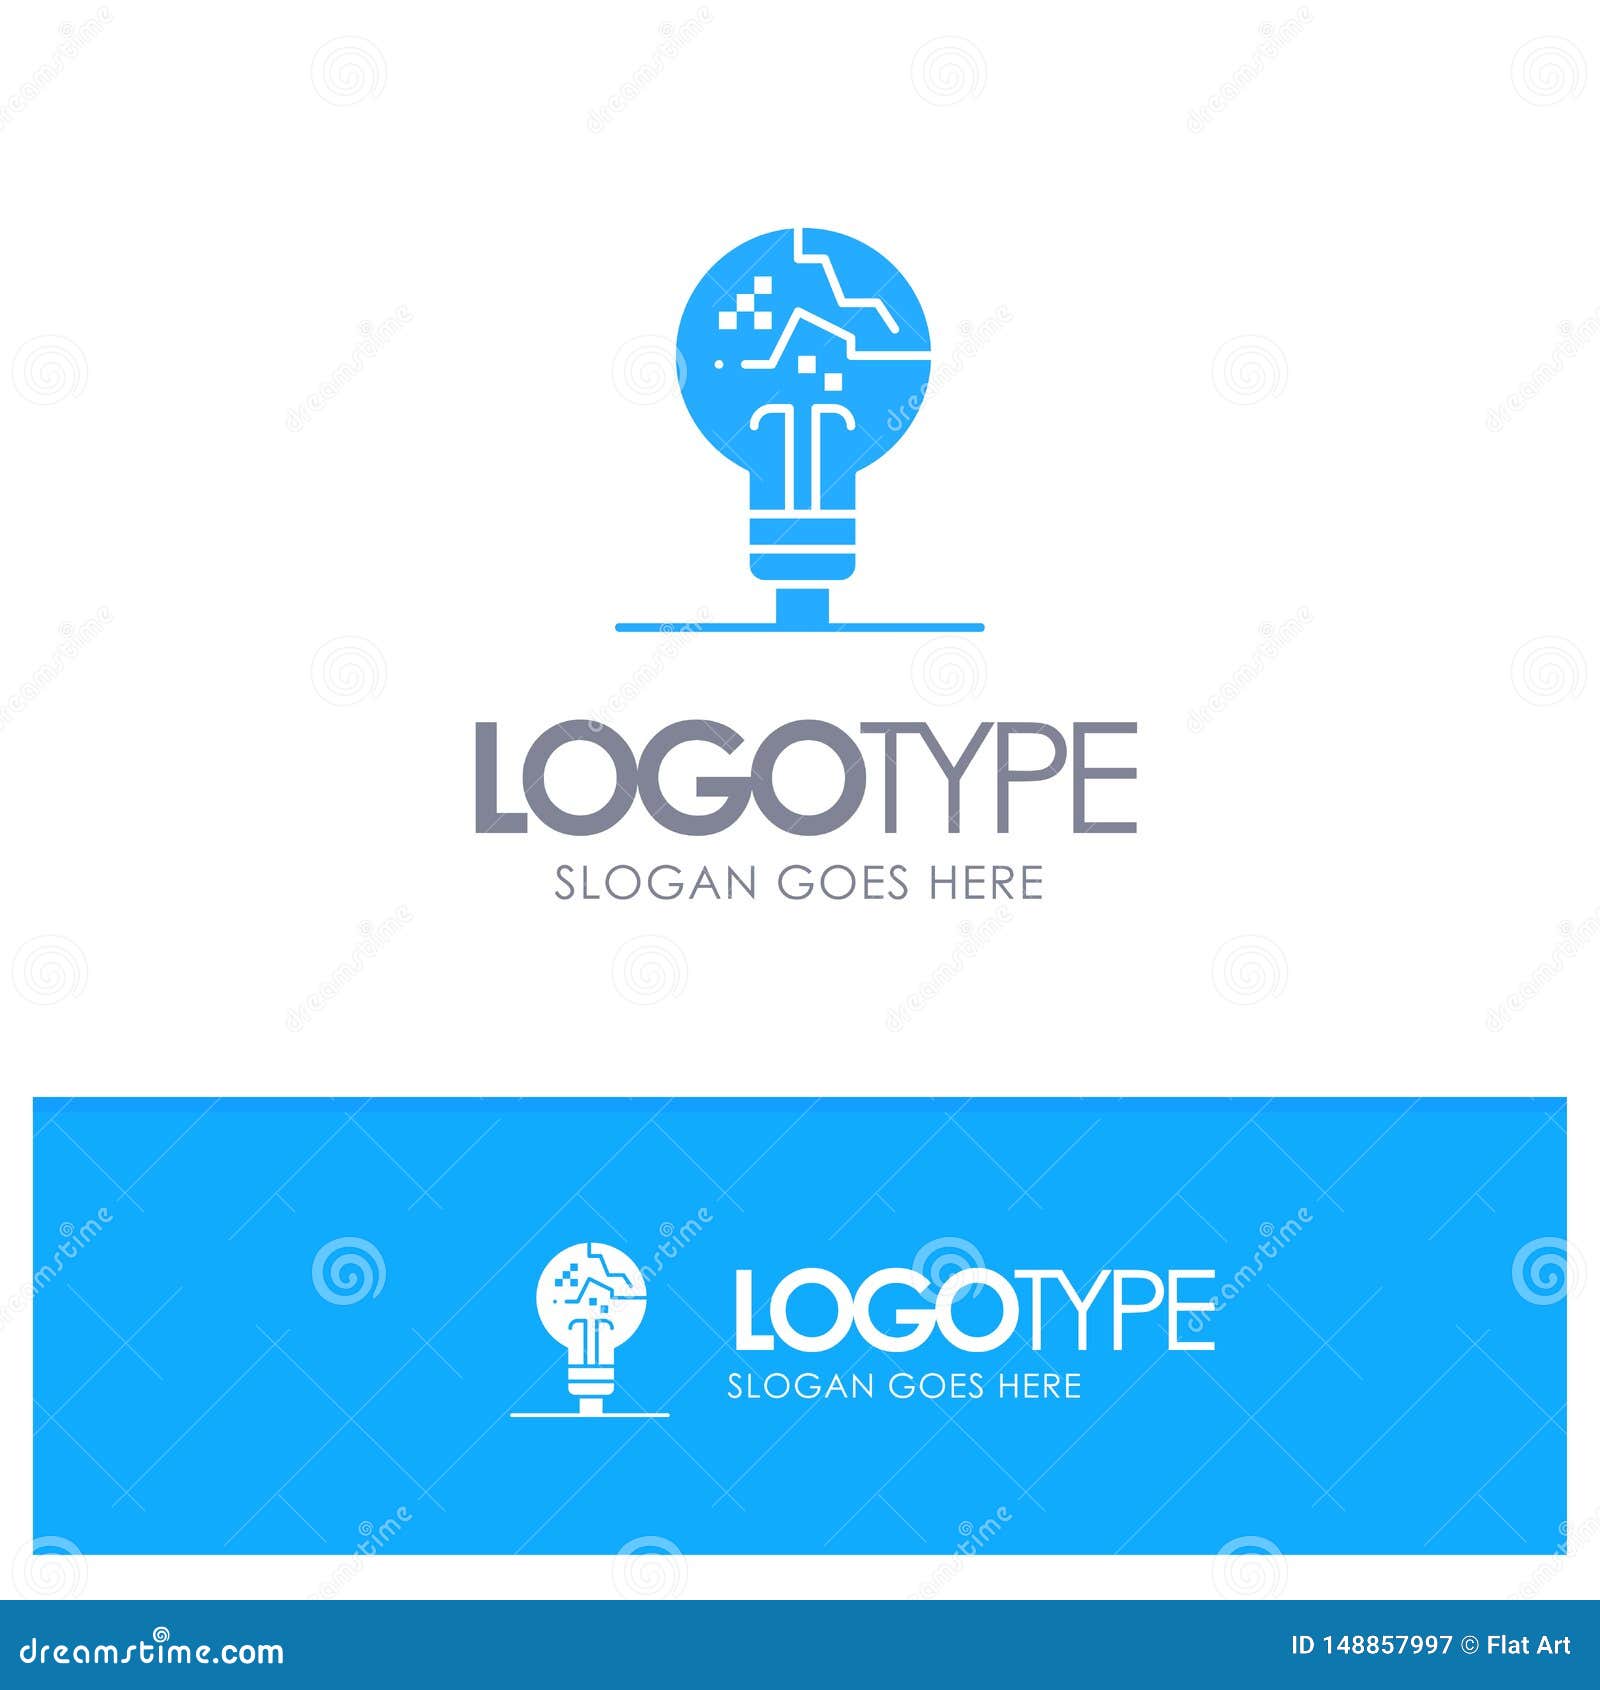 Concept Copycat Fail Fake Idea Blue Solid Logo With Place For